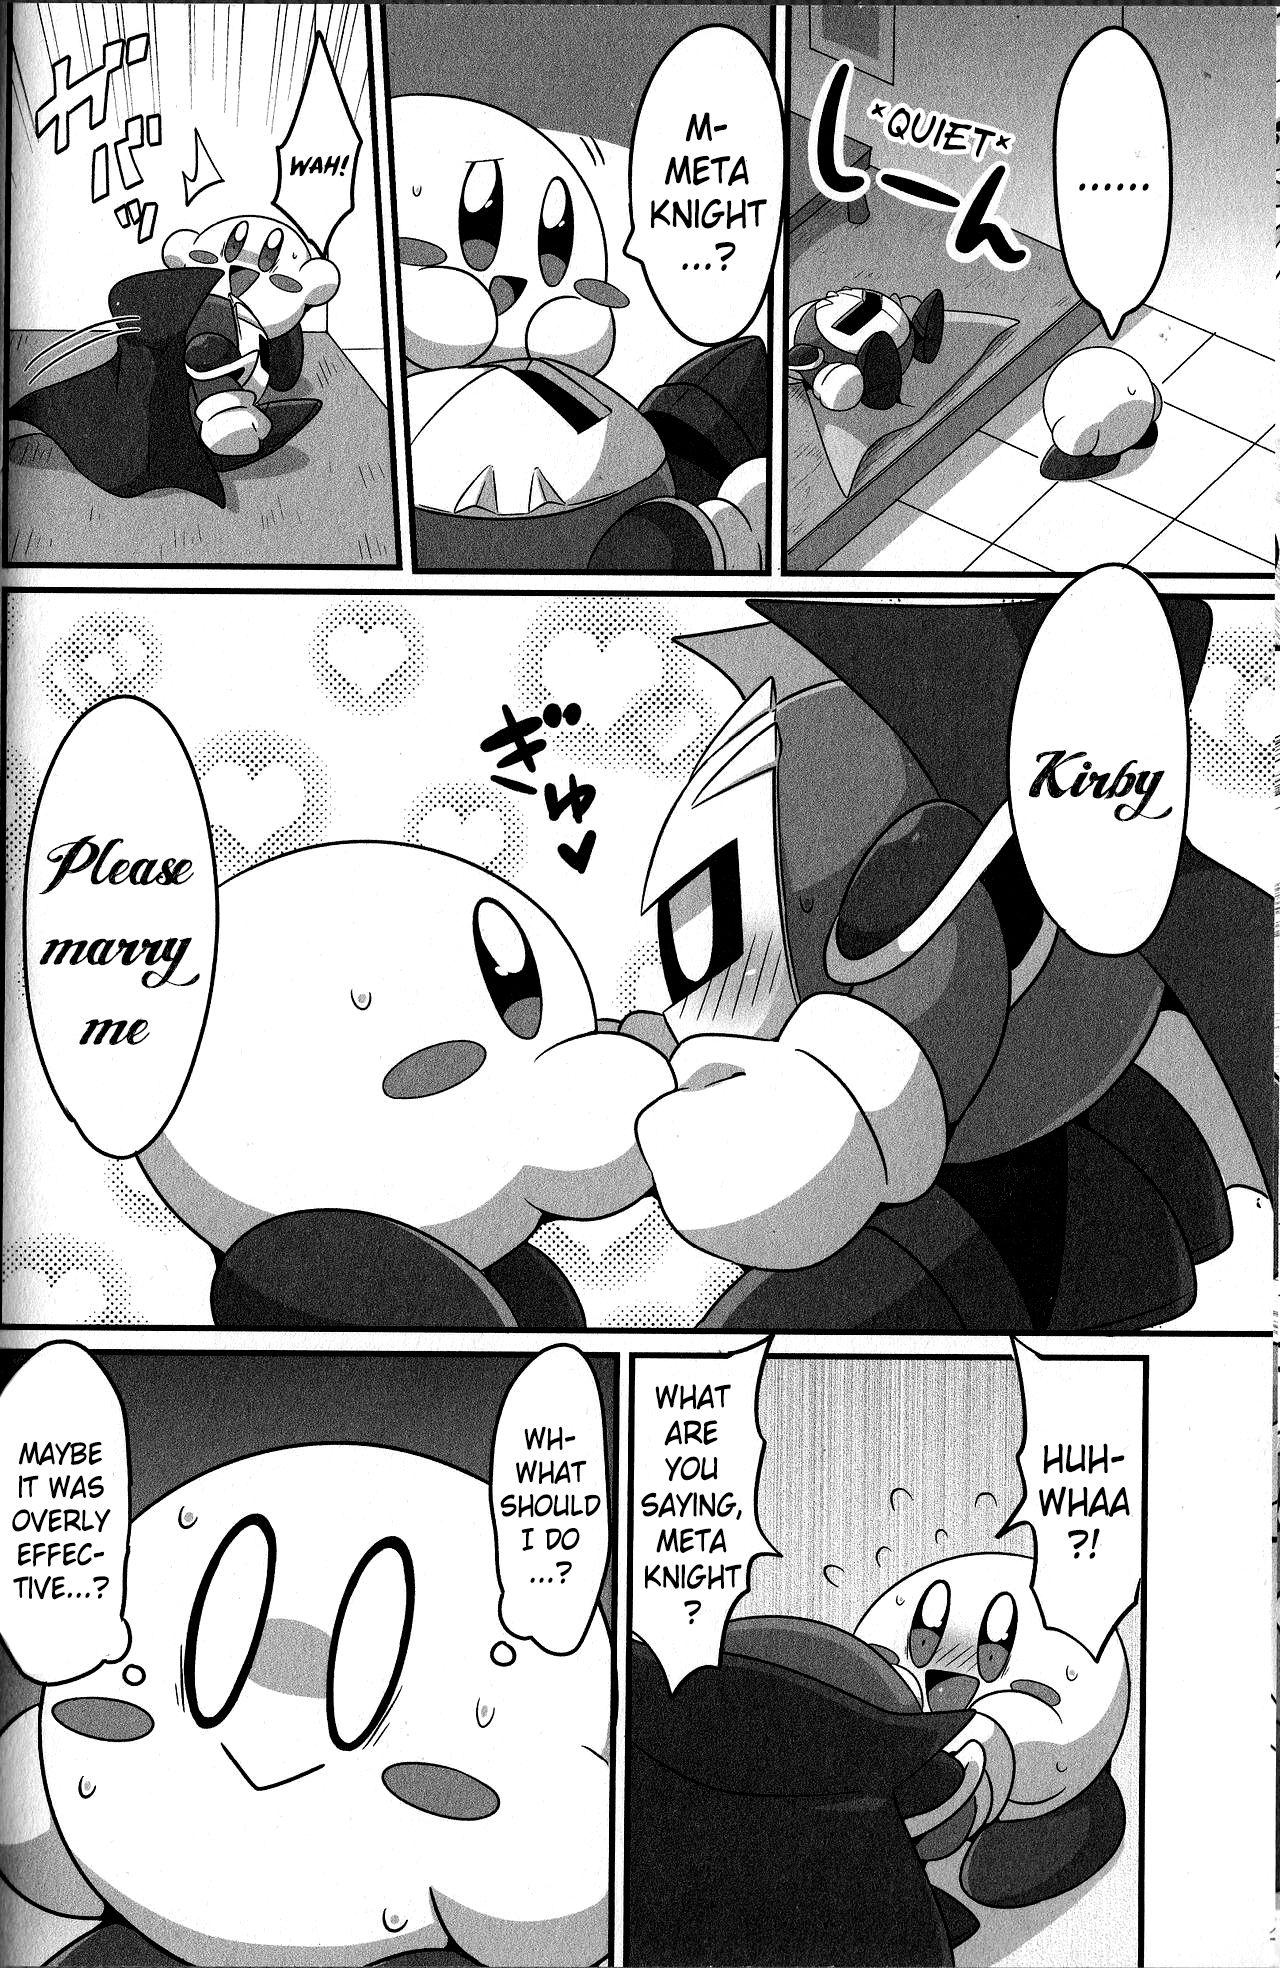 Extreme I Want to Do XXX Even For Spheres! - Kirby Glamcore - Page 9